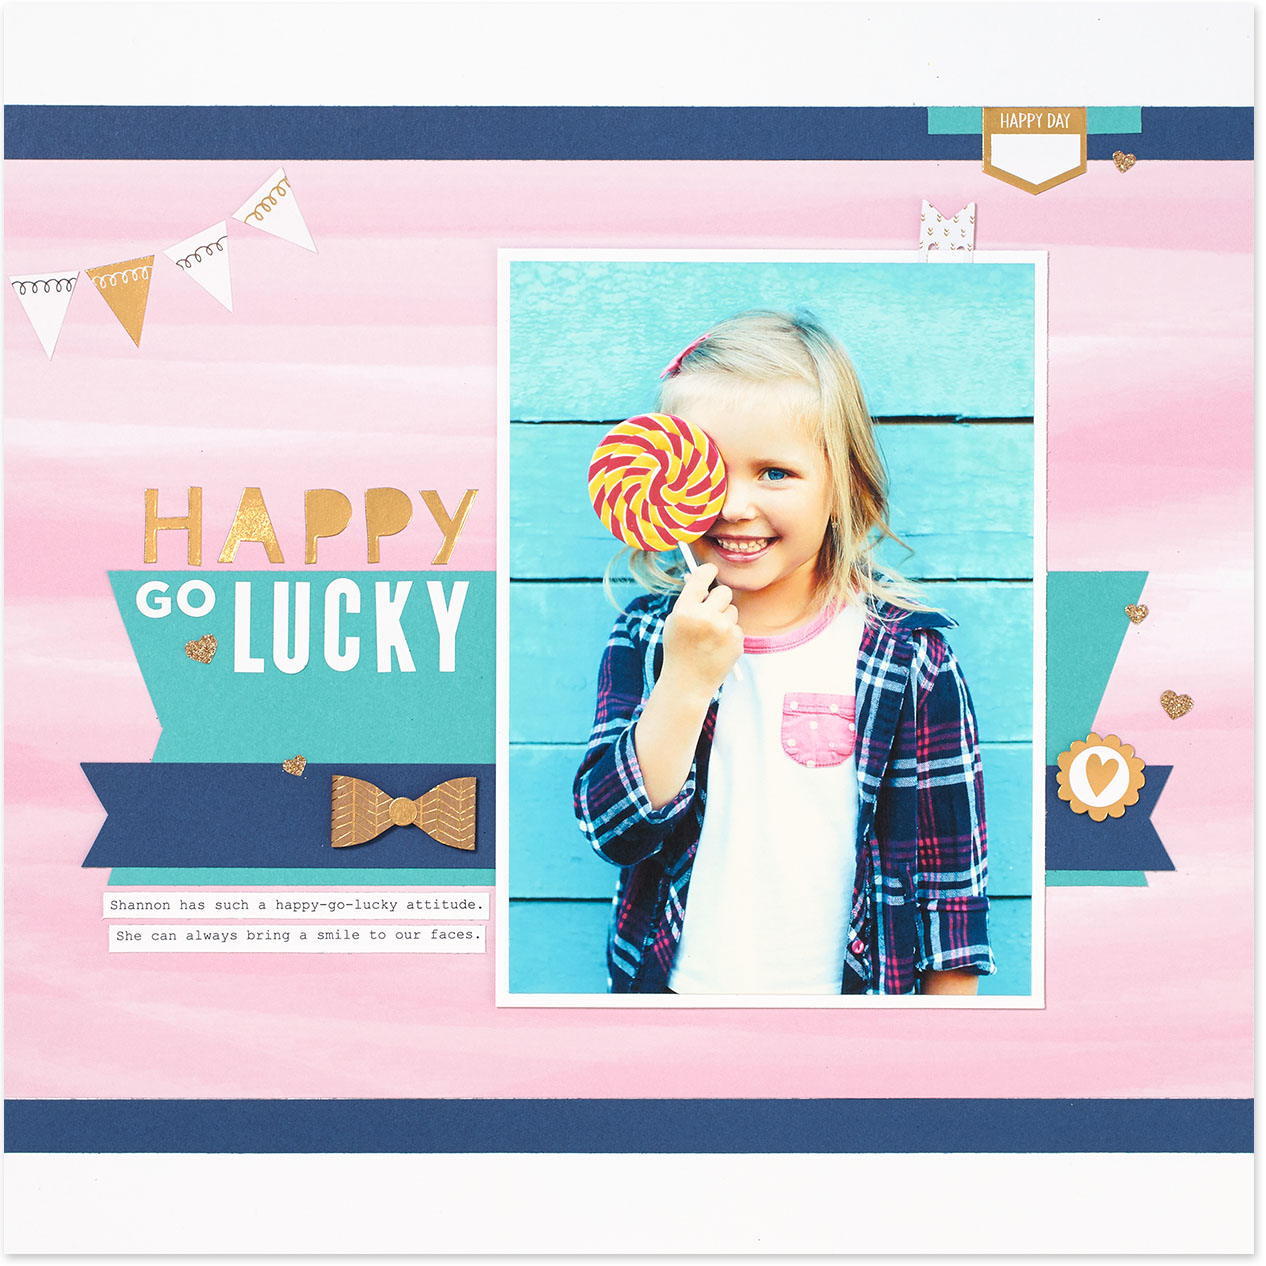 See just how far one bundle of our stickers and embellishments can go! Tons of scrapbook pages to inspire your crafting. #ctmh #closetomyheart #scrapbookingideas #scrapbook #papercrafting #easyscrapbooking #scraphappy